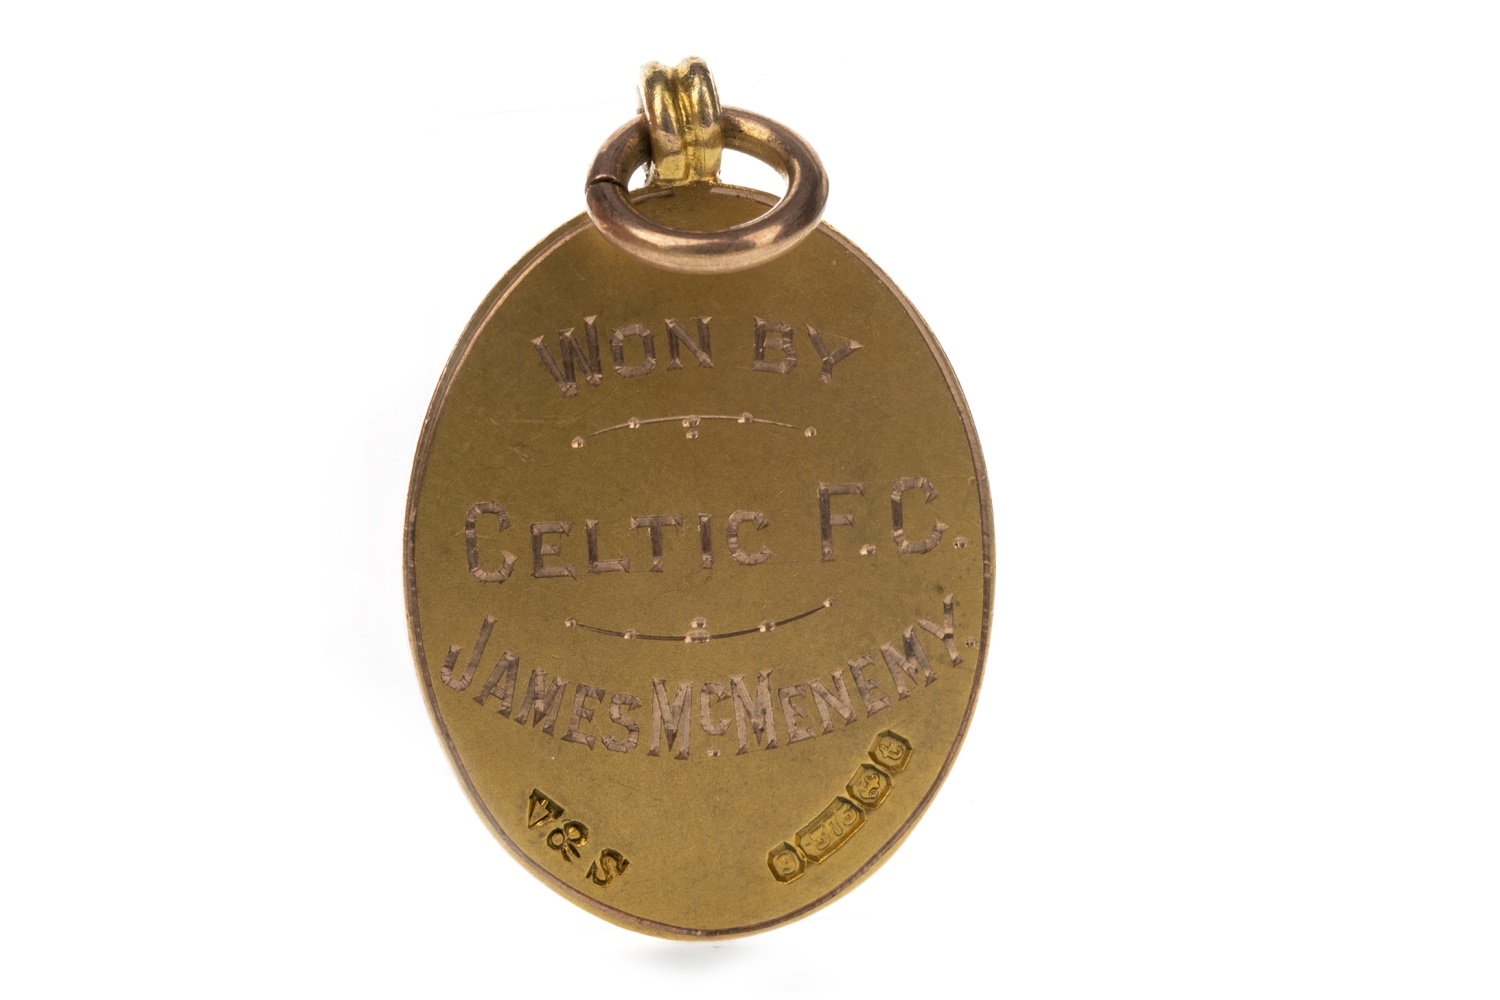 JIMMY MCMENEMY - HIS GLASGOW CHARITY CUP WINNERS GOLD MEDAL 1918 - Image 2 of 3